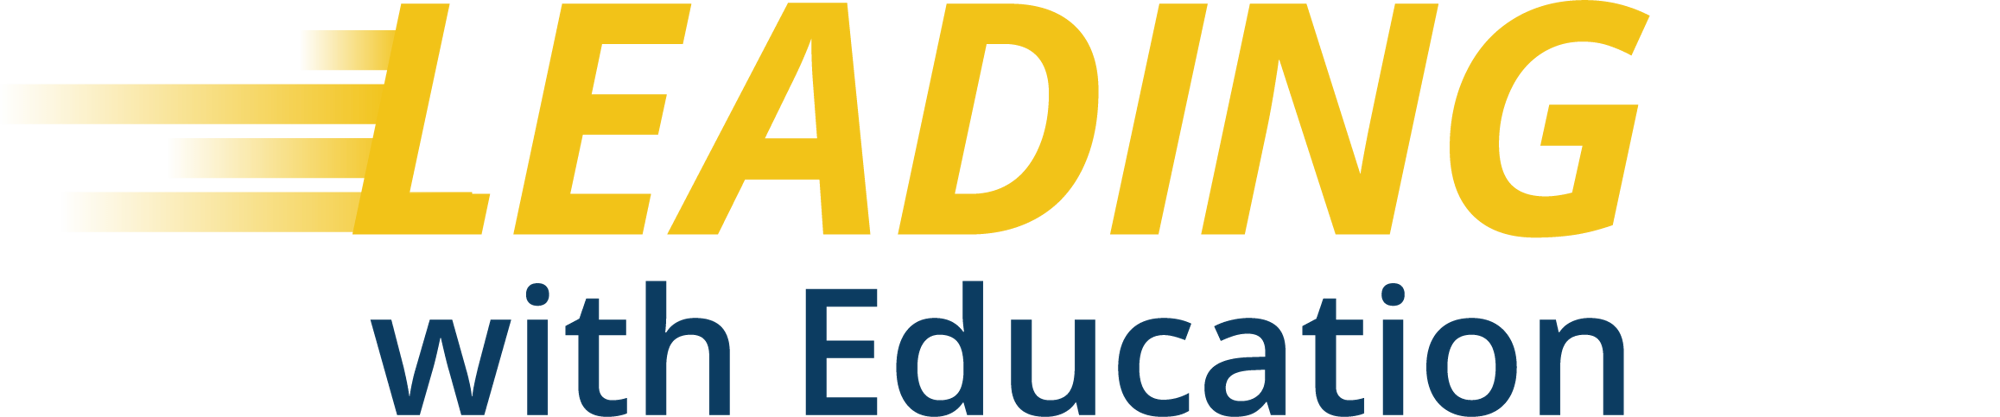 leading-with-education-logo-color-centered